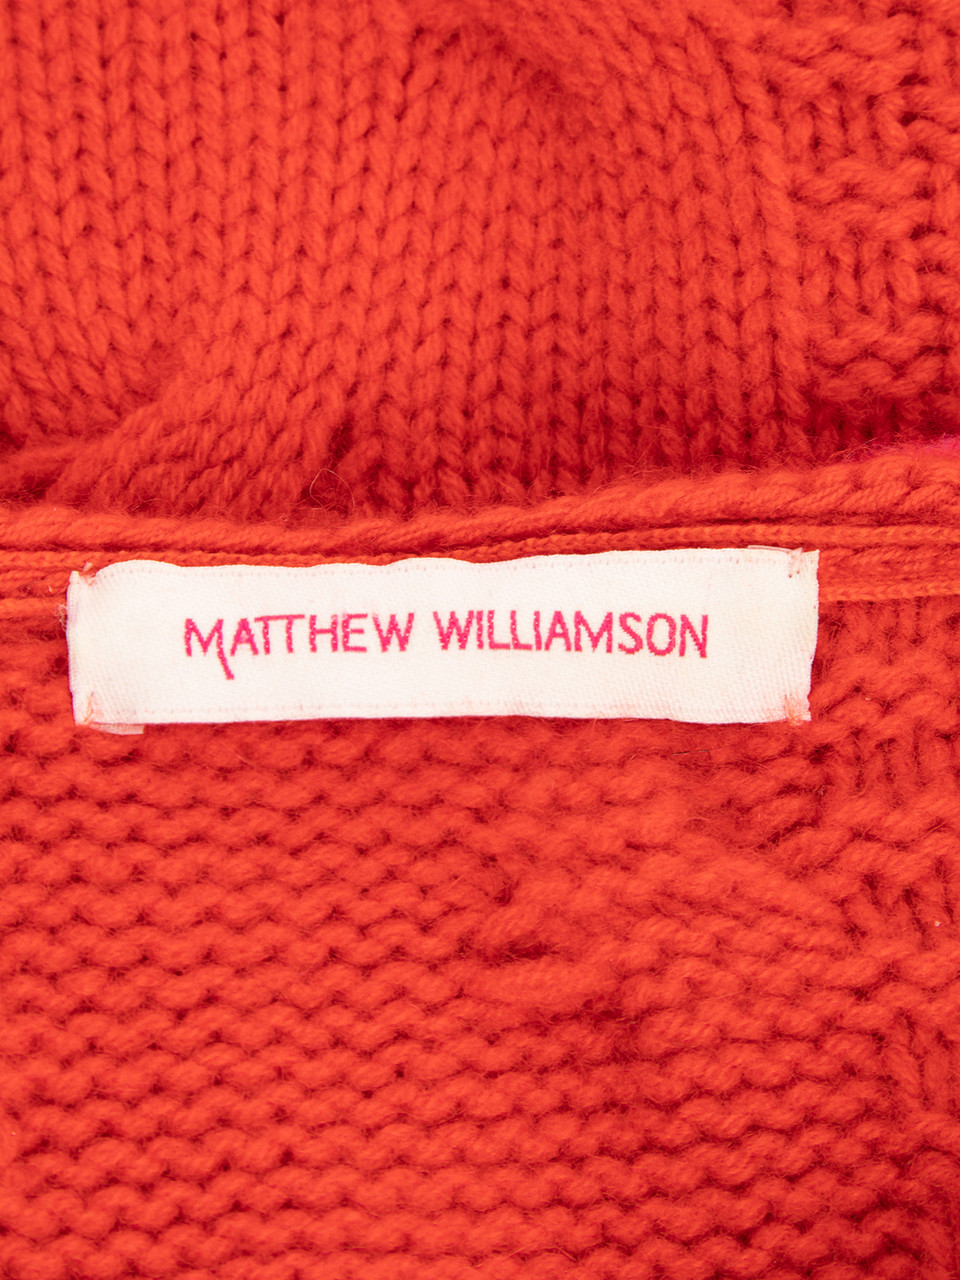 Matthew Williamson Knit Hooded Dress With Pockets